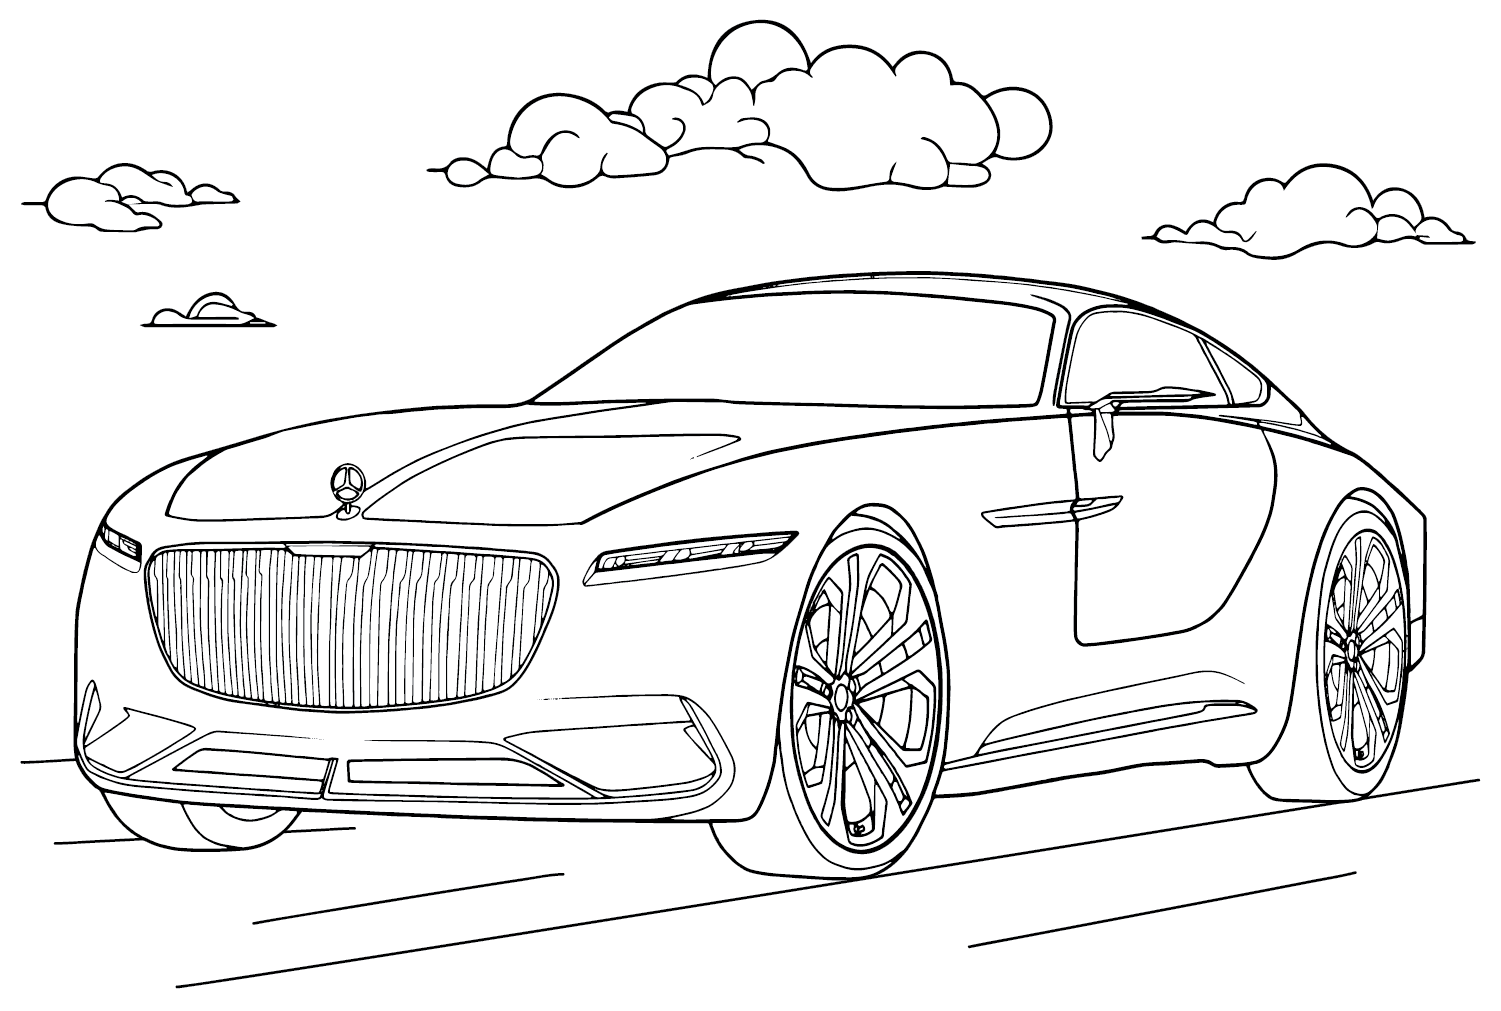 Mercedes Maybach S-Class Coloring Page from Mercedes-Benz